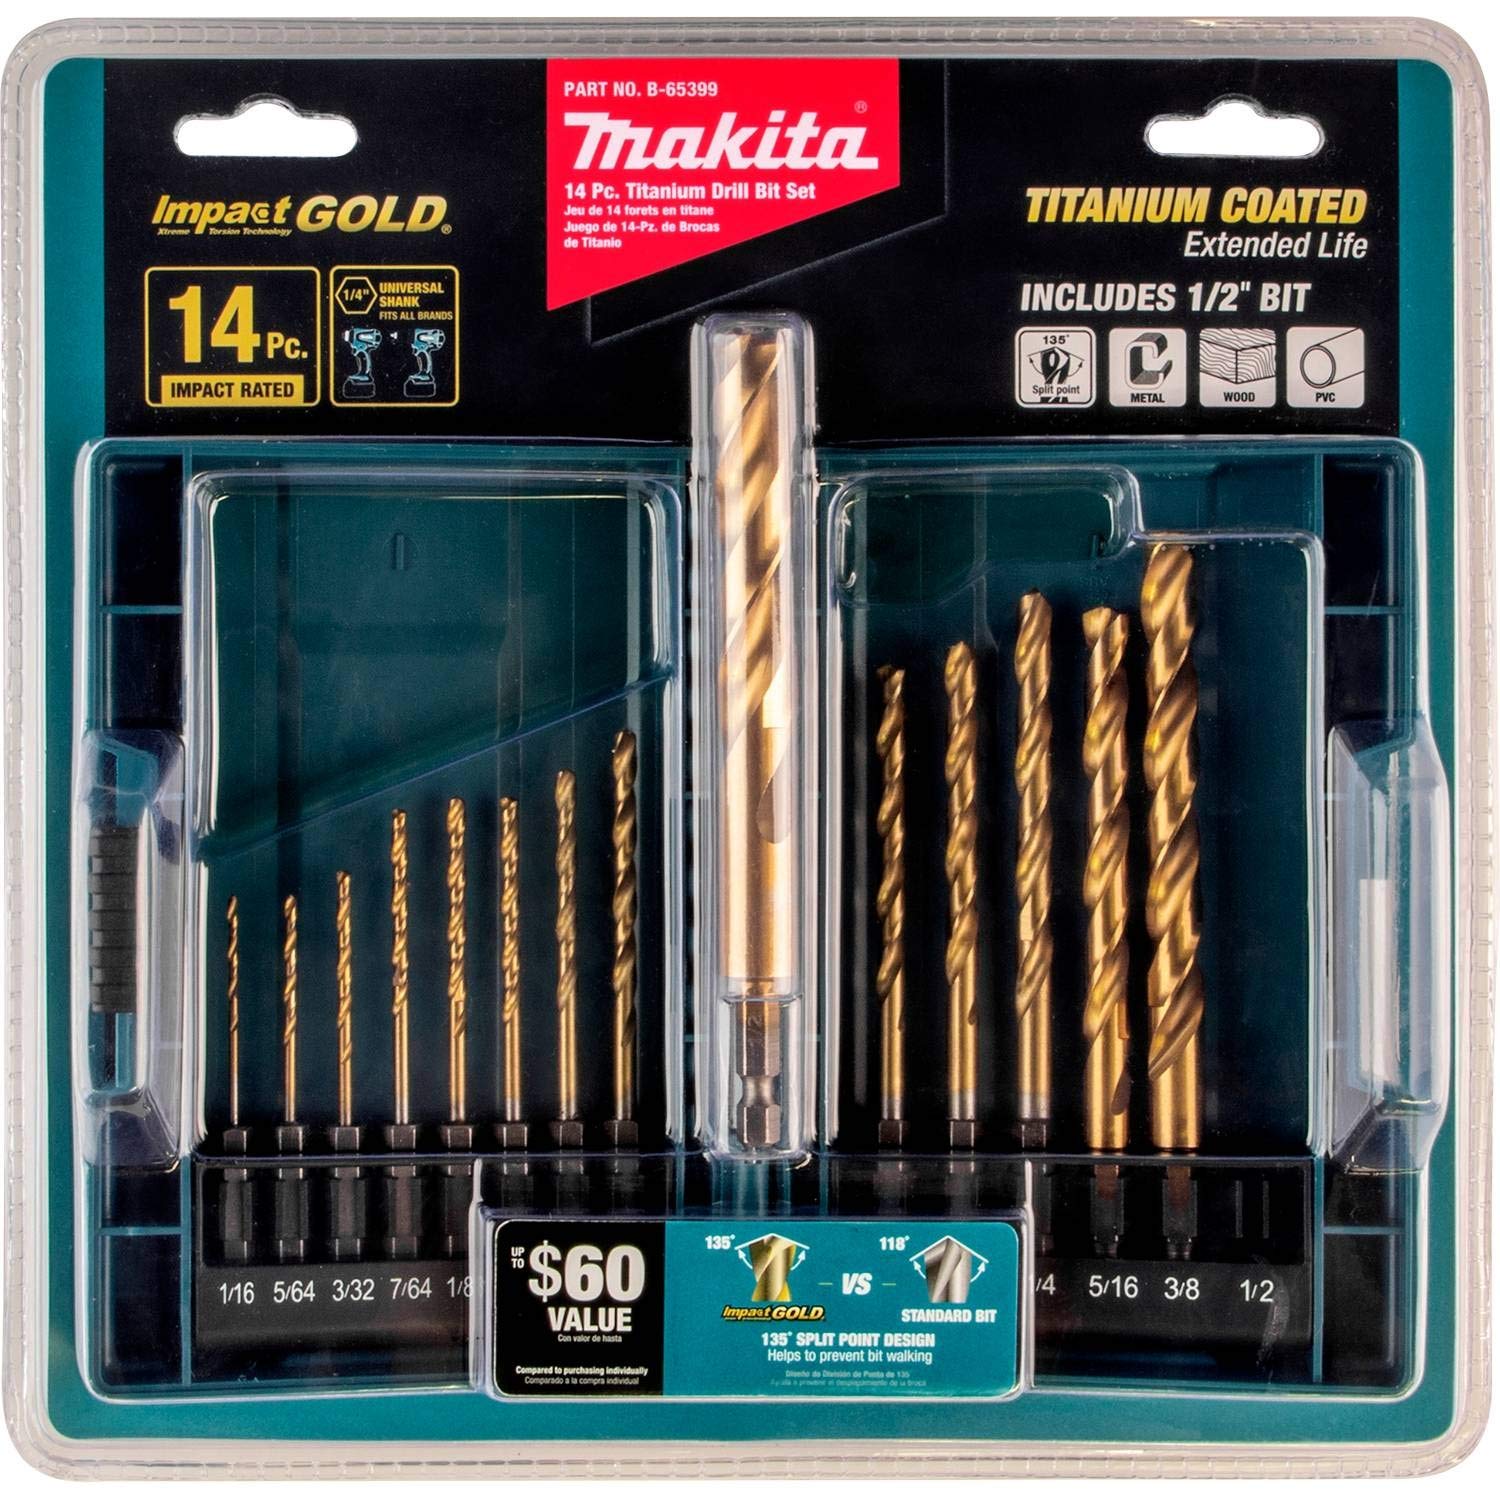 Makita B-65399 Impact Gold 14 Pc. Titanium Coating Drill Bit Set, 1/4 In. Hex Shank $11 + Free Shipping w/ Prime or on $35+